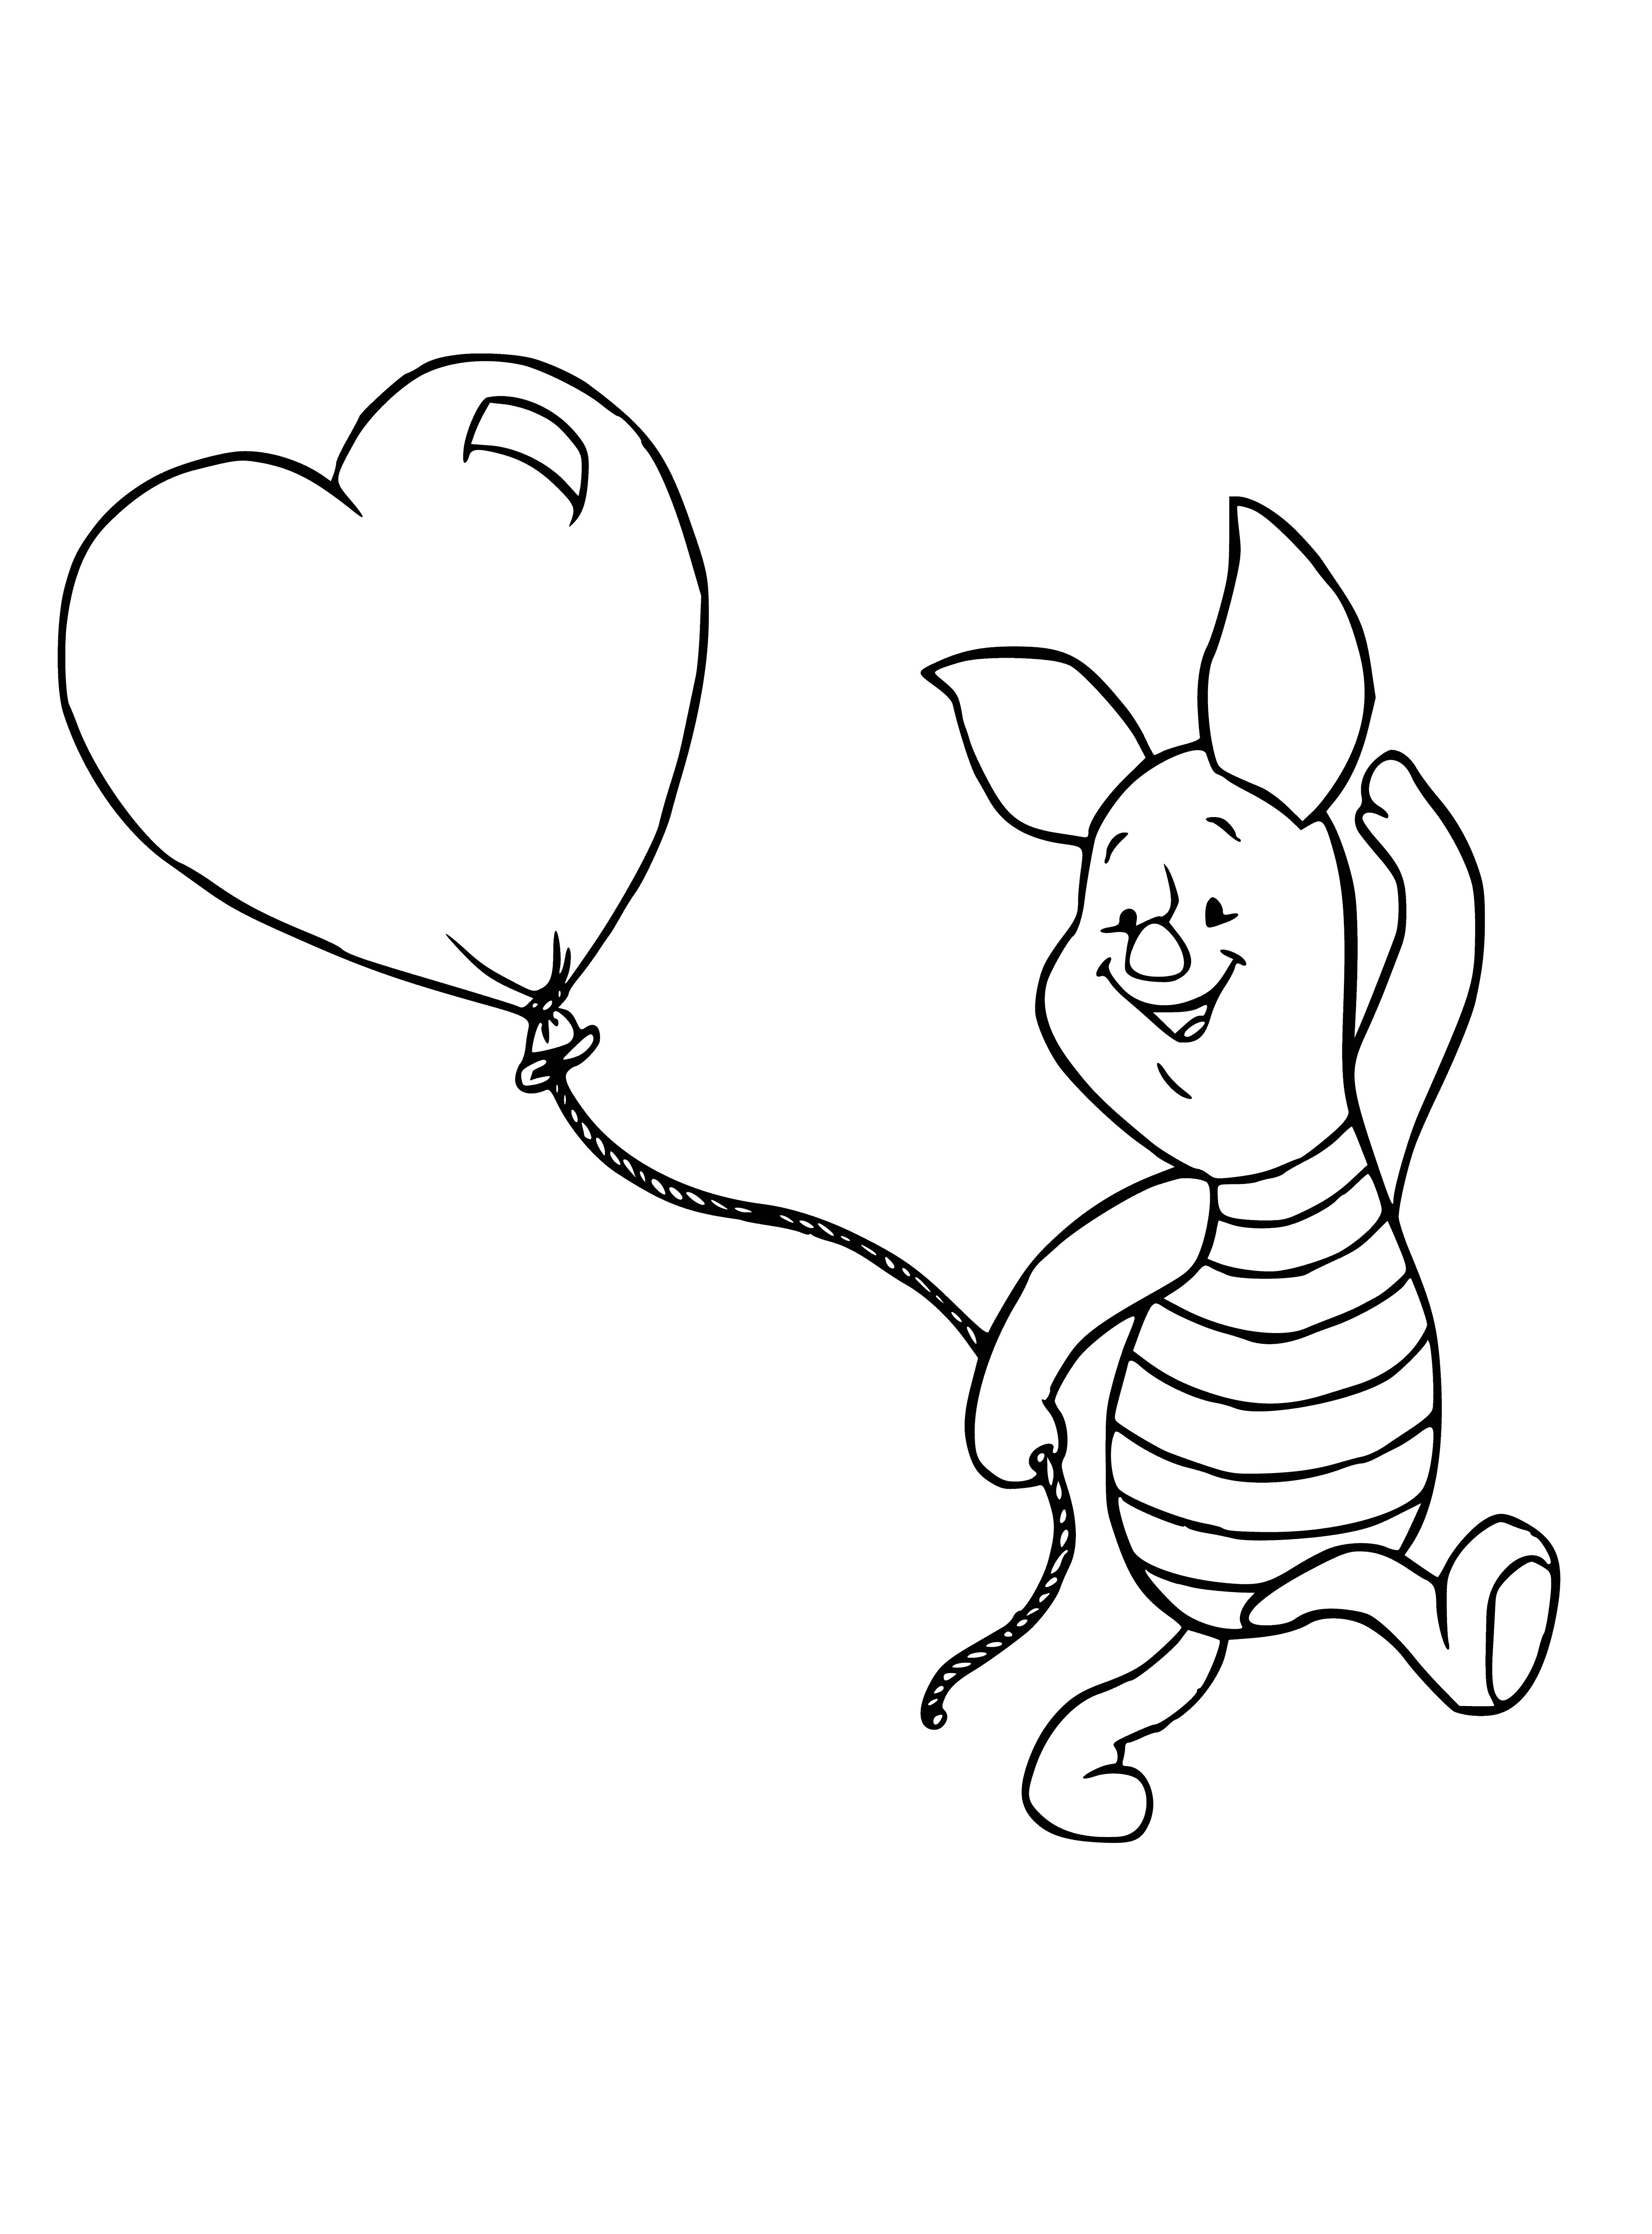 Pig with a ball coloring page